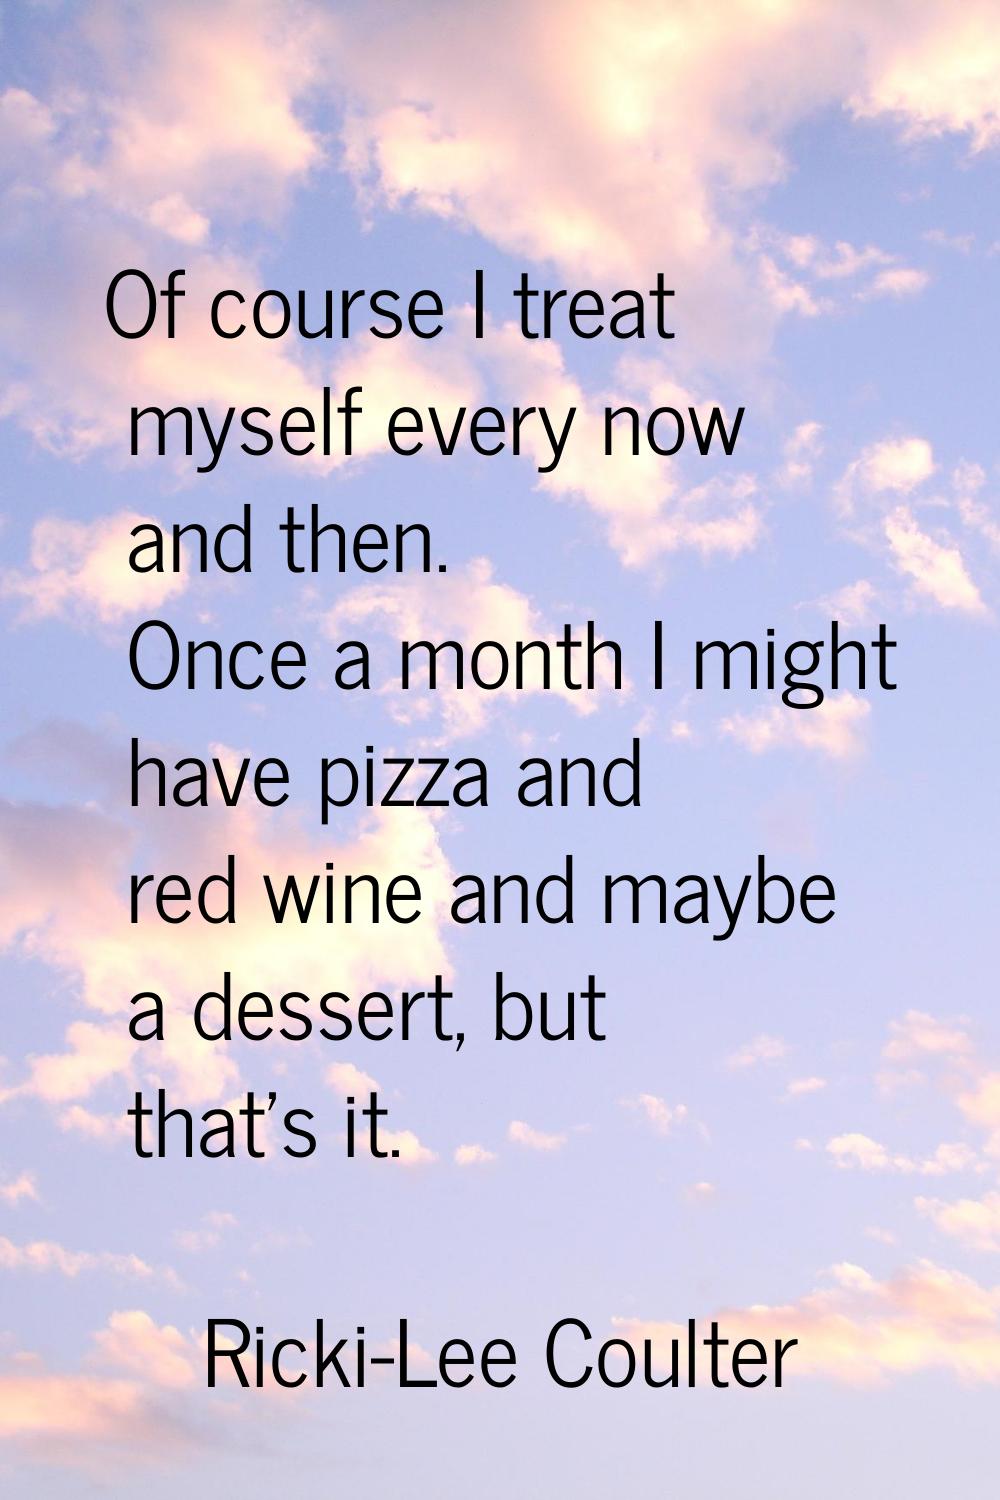 Of course I treat myself every now and then. Once a month I might have pizza and red wine and maybe